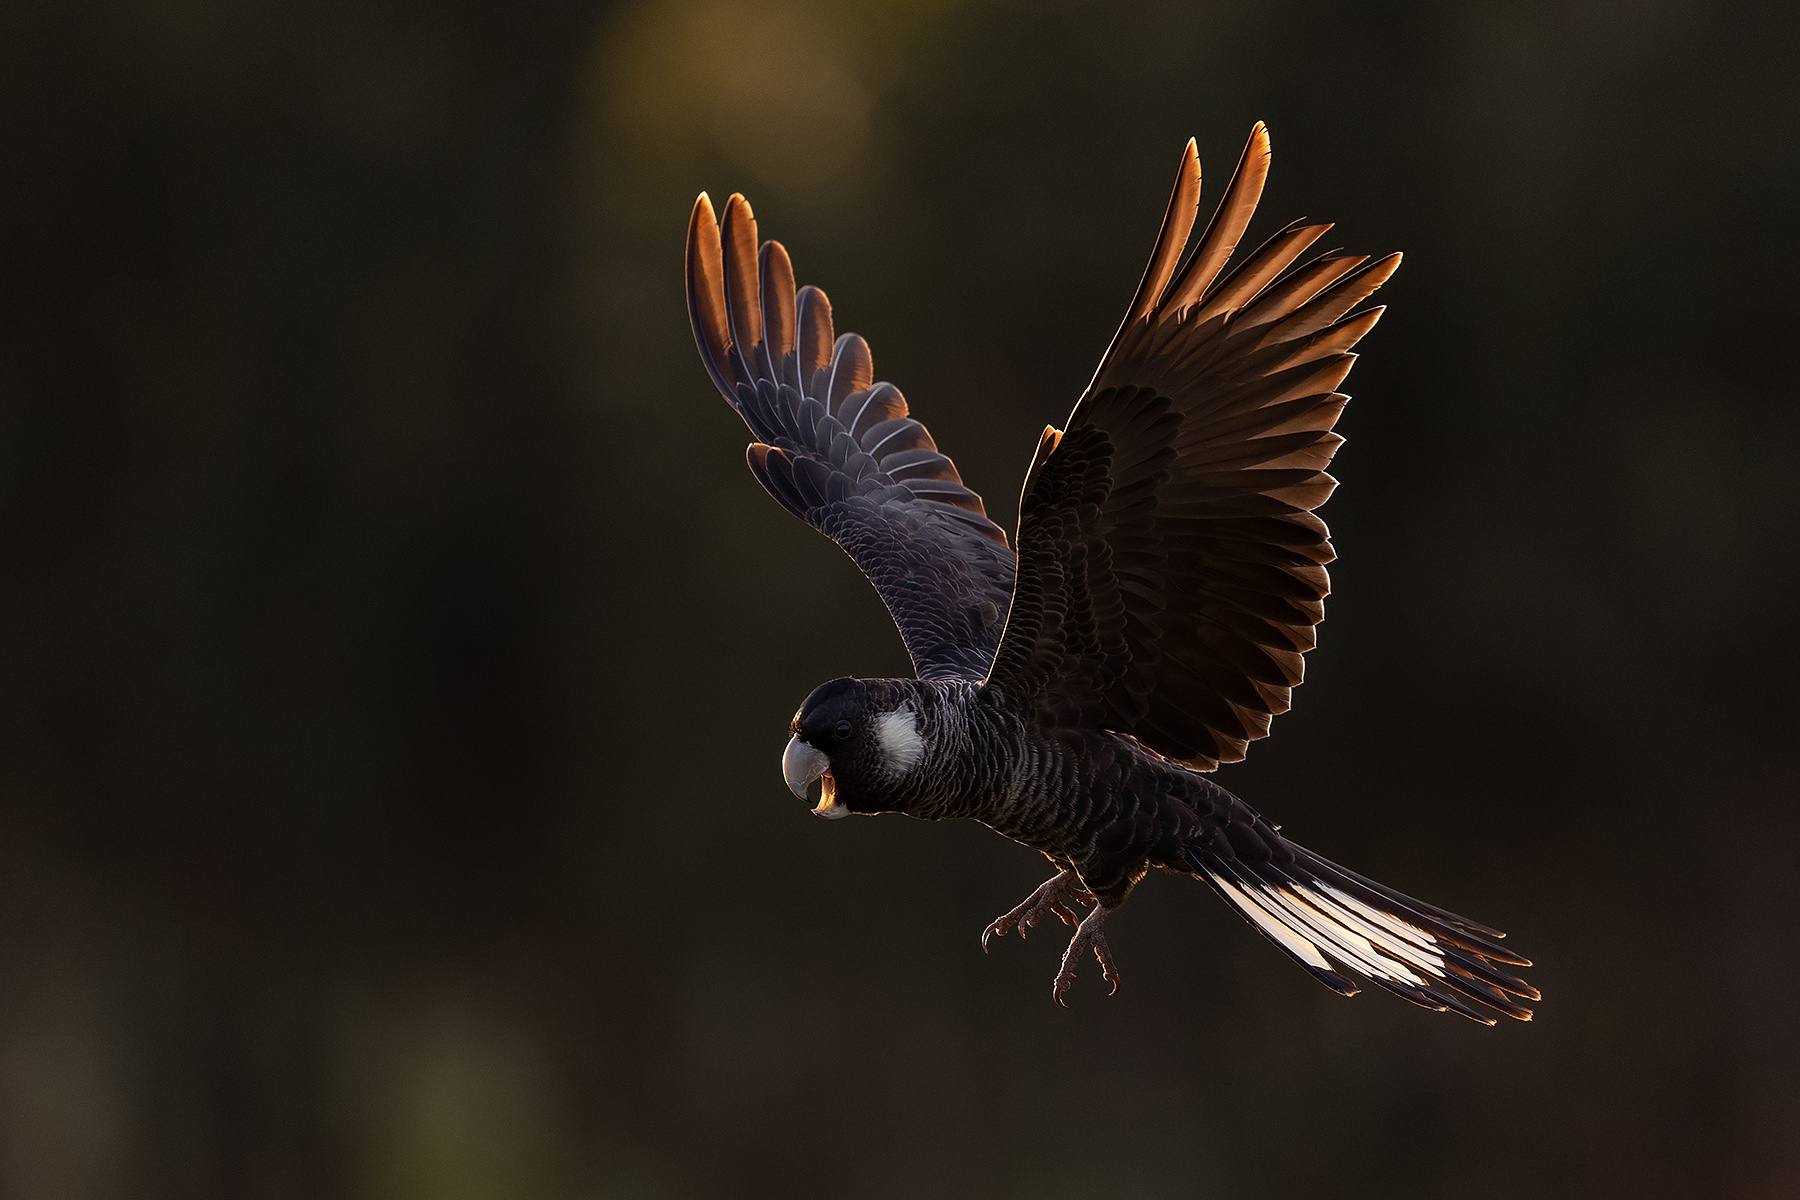 To the right of the frame, a female black-and-white- Carnaby's Black-Cockatoo is screeching in flight, facing left. Her silhouette is backlit against a dark background.